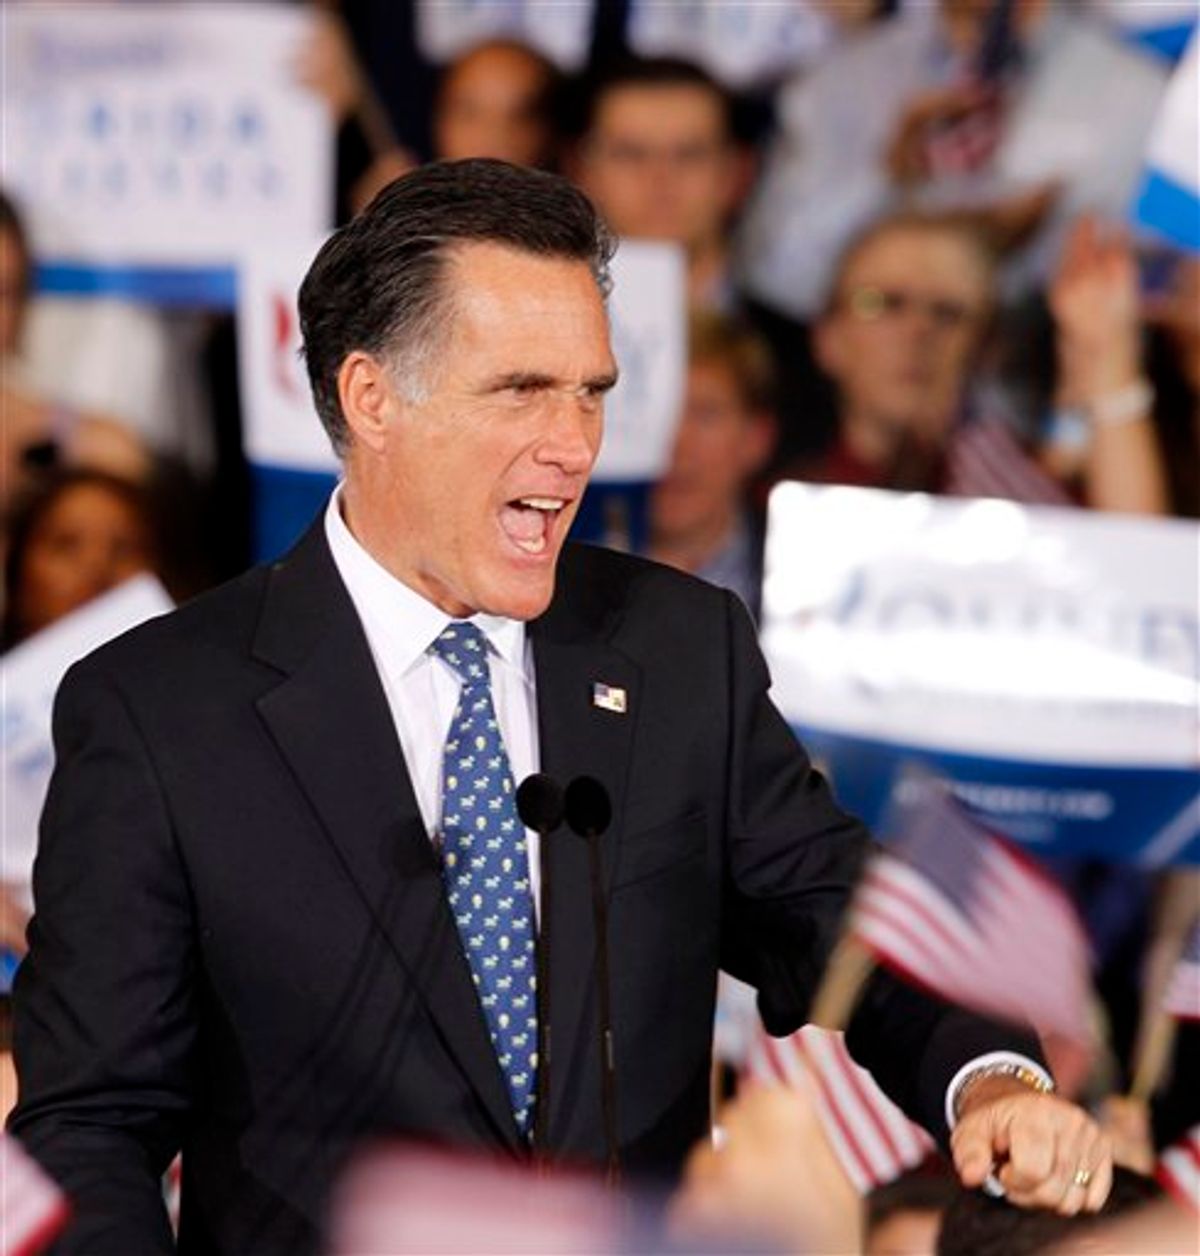 Republican presidential candidate, former Massachusetts Gov. Mitt Romney, reacts to supporters at his Florida primary primary night rally in Tampa, Fla., Tuesday, Jan. 31, 2012. (AP Photo/Gerald Herbert)         (AP)